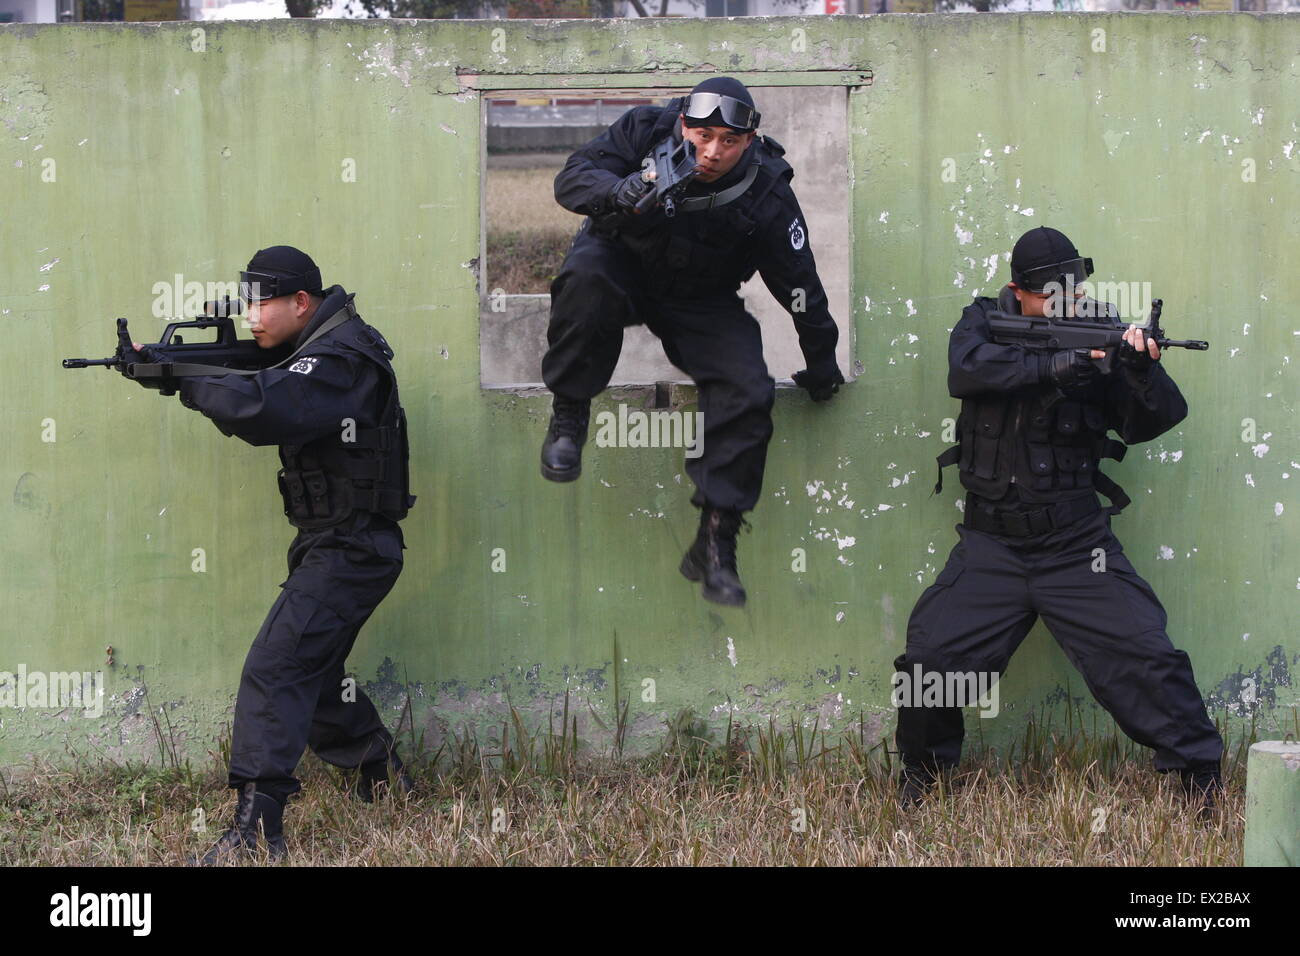 A paramilitary policeman demonstrates shooting while stepping over barriers to recruits during a training session at a military Stock Photo